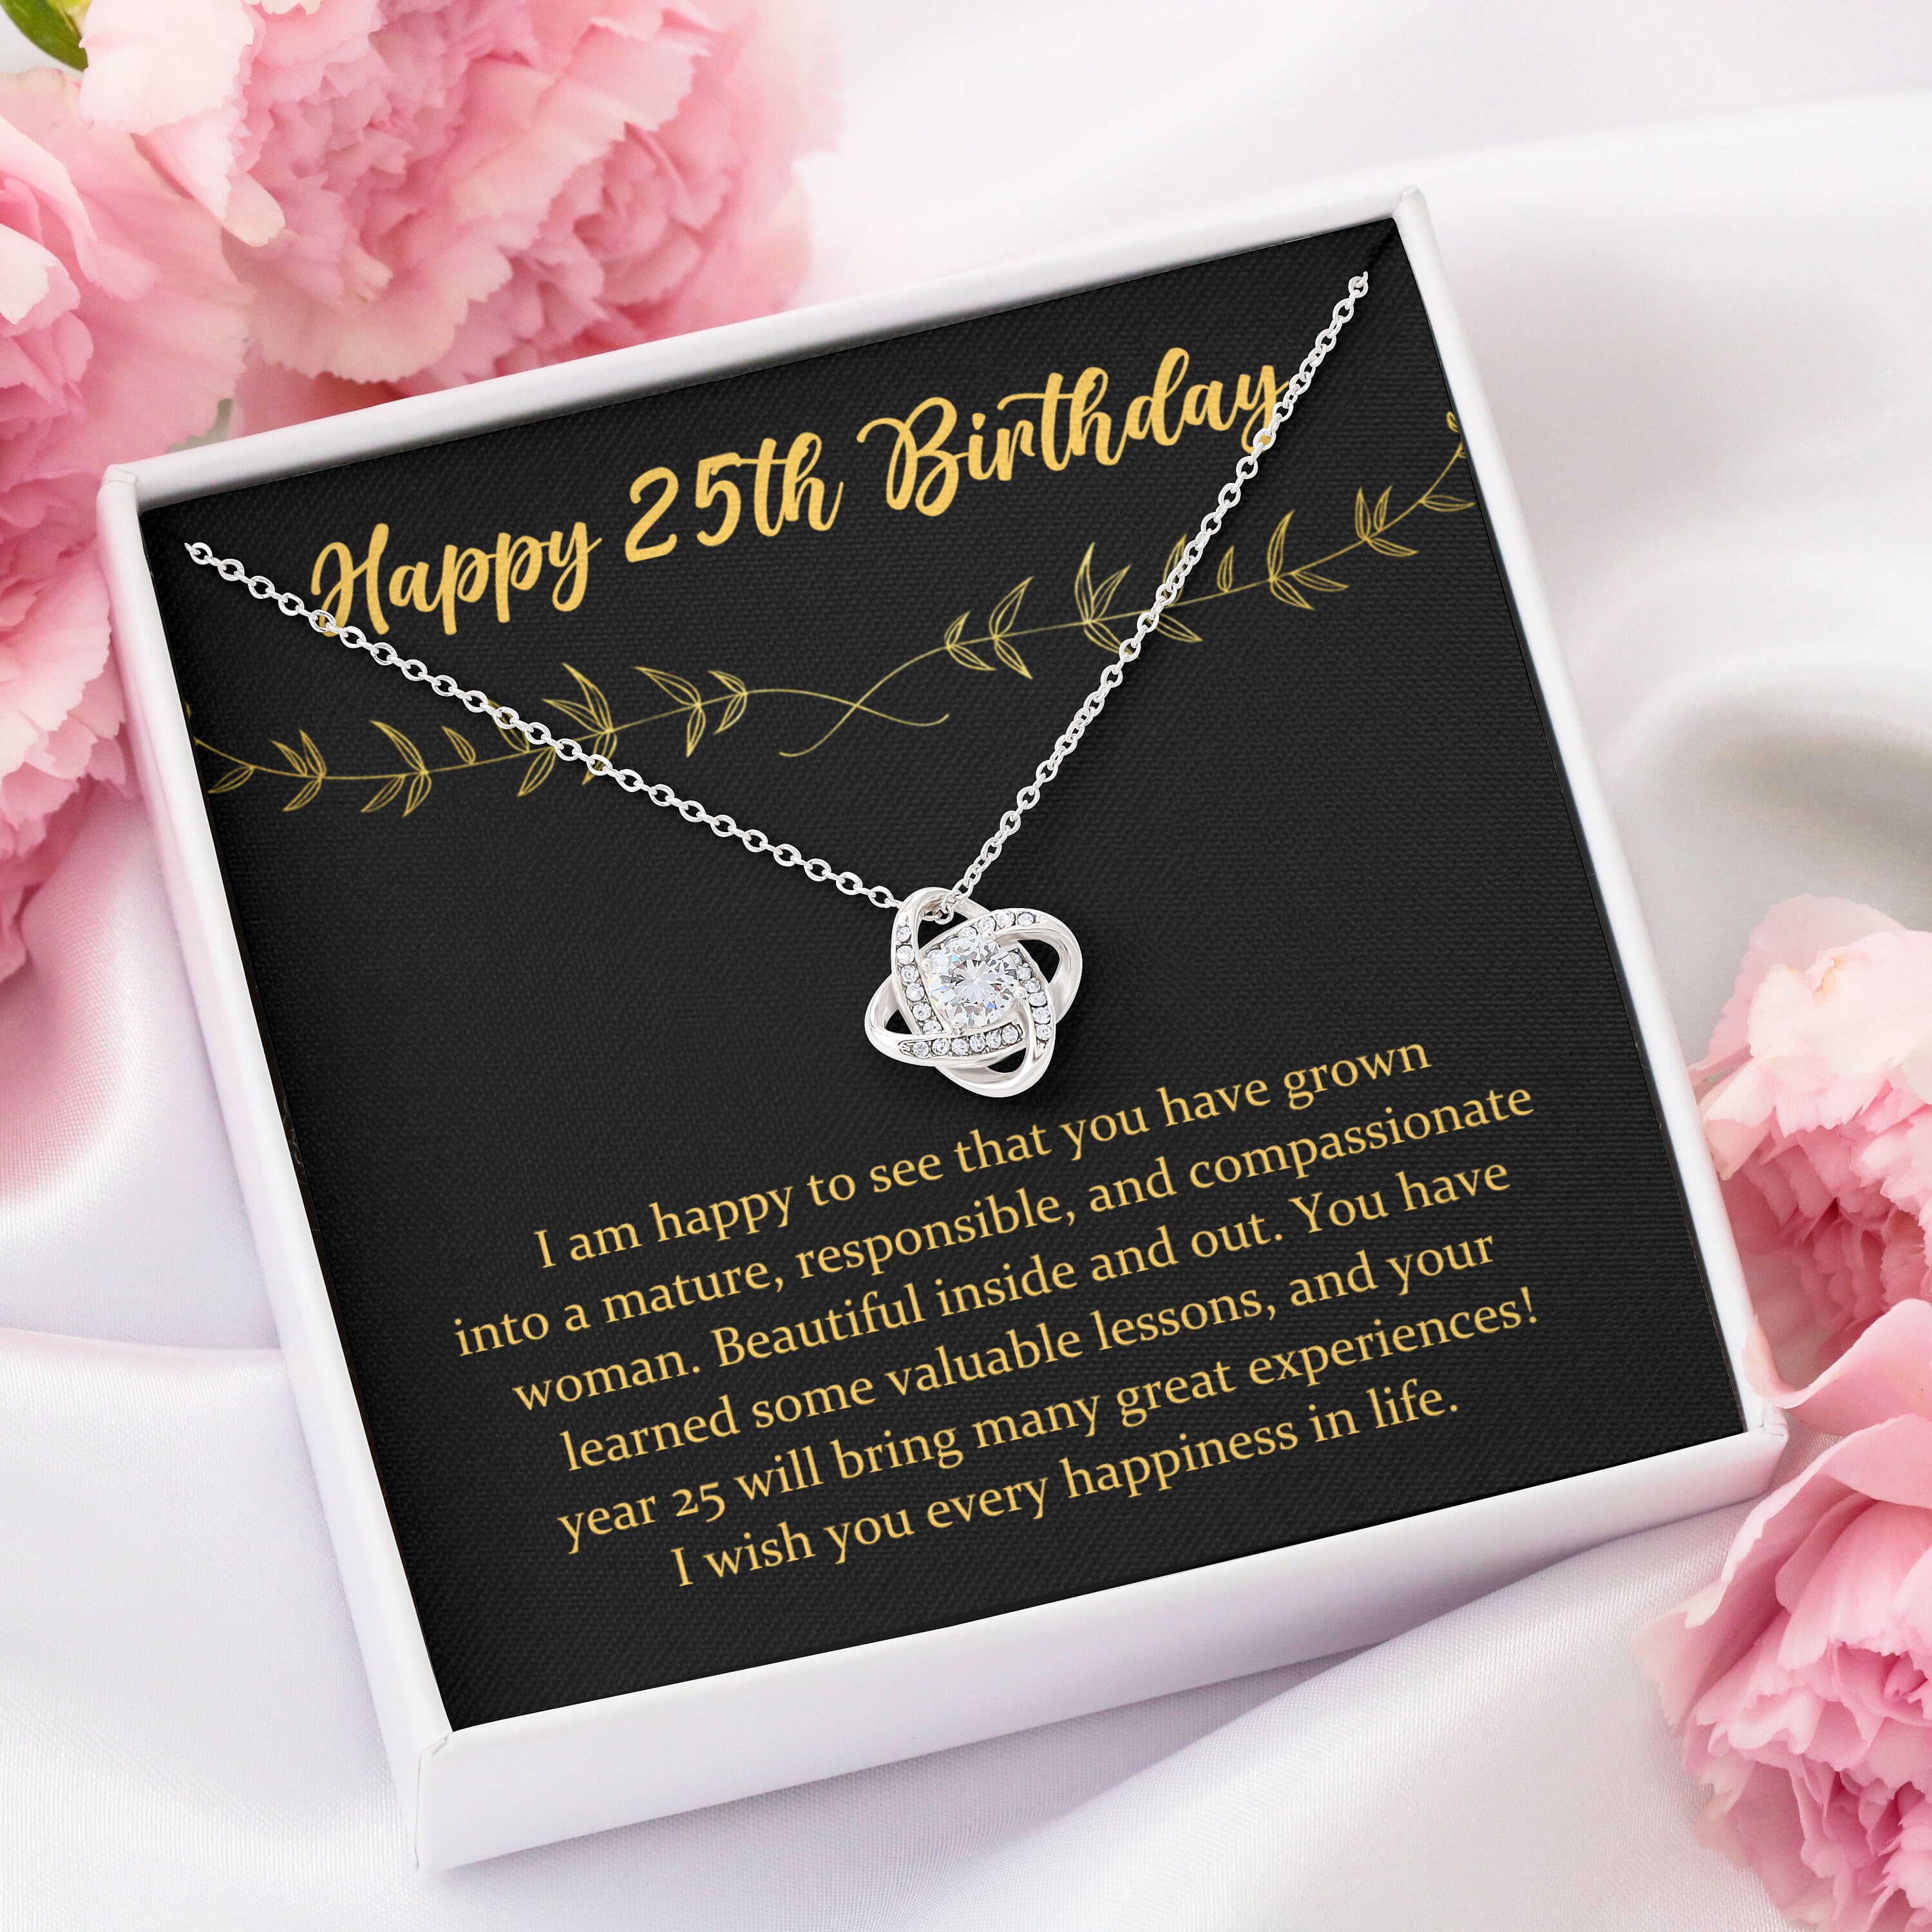 25th Birthday Gifts For Women, Cool Gifts For 25 Year Old Woman, 1998  Birthday Gifts For Women, 25th Birthday Gift Ideas, 25 Year Old Birthday  Gifts